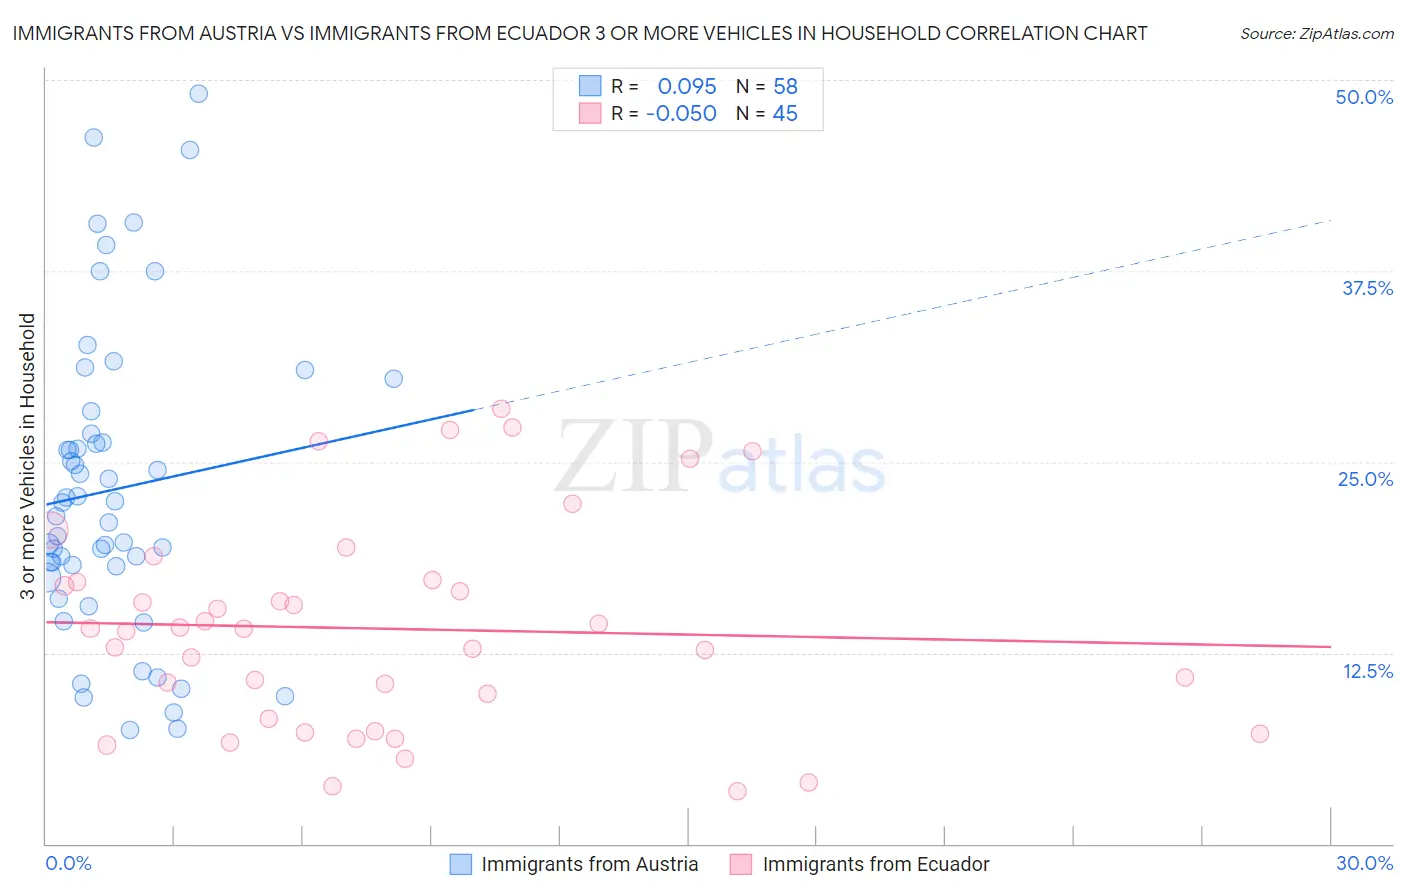 Immigrants from Austria vs Immigrants from Ecuador 3 or more Vehicles in Household